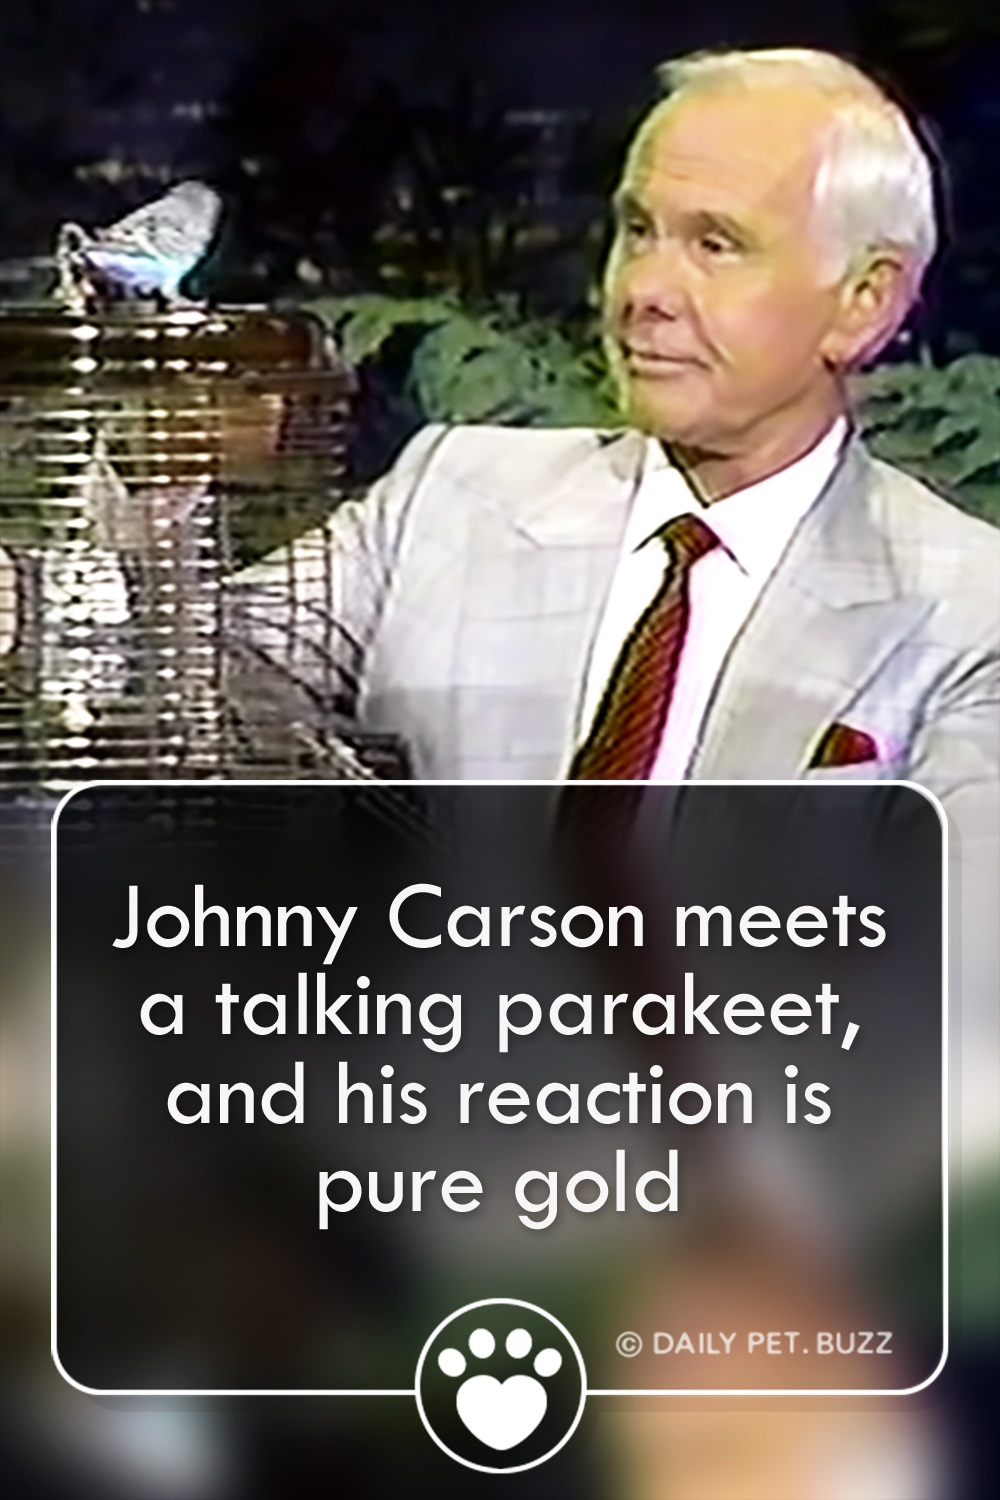 Johnny Carson meets a talking parakeet, and his reaction is pure gold